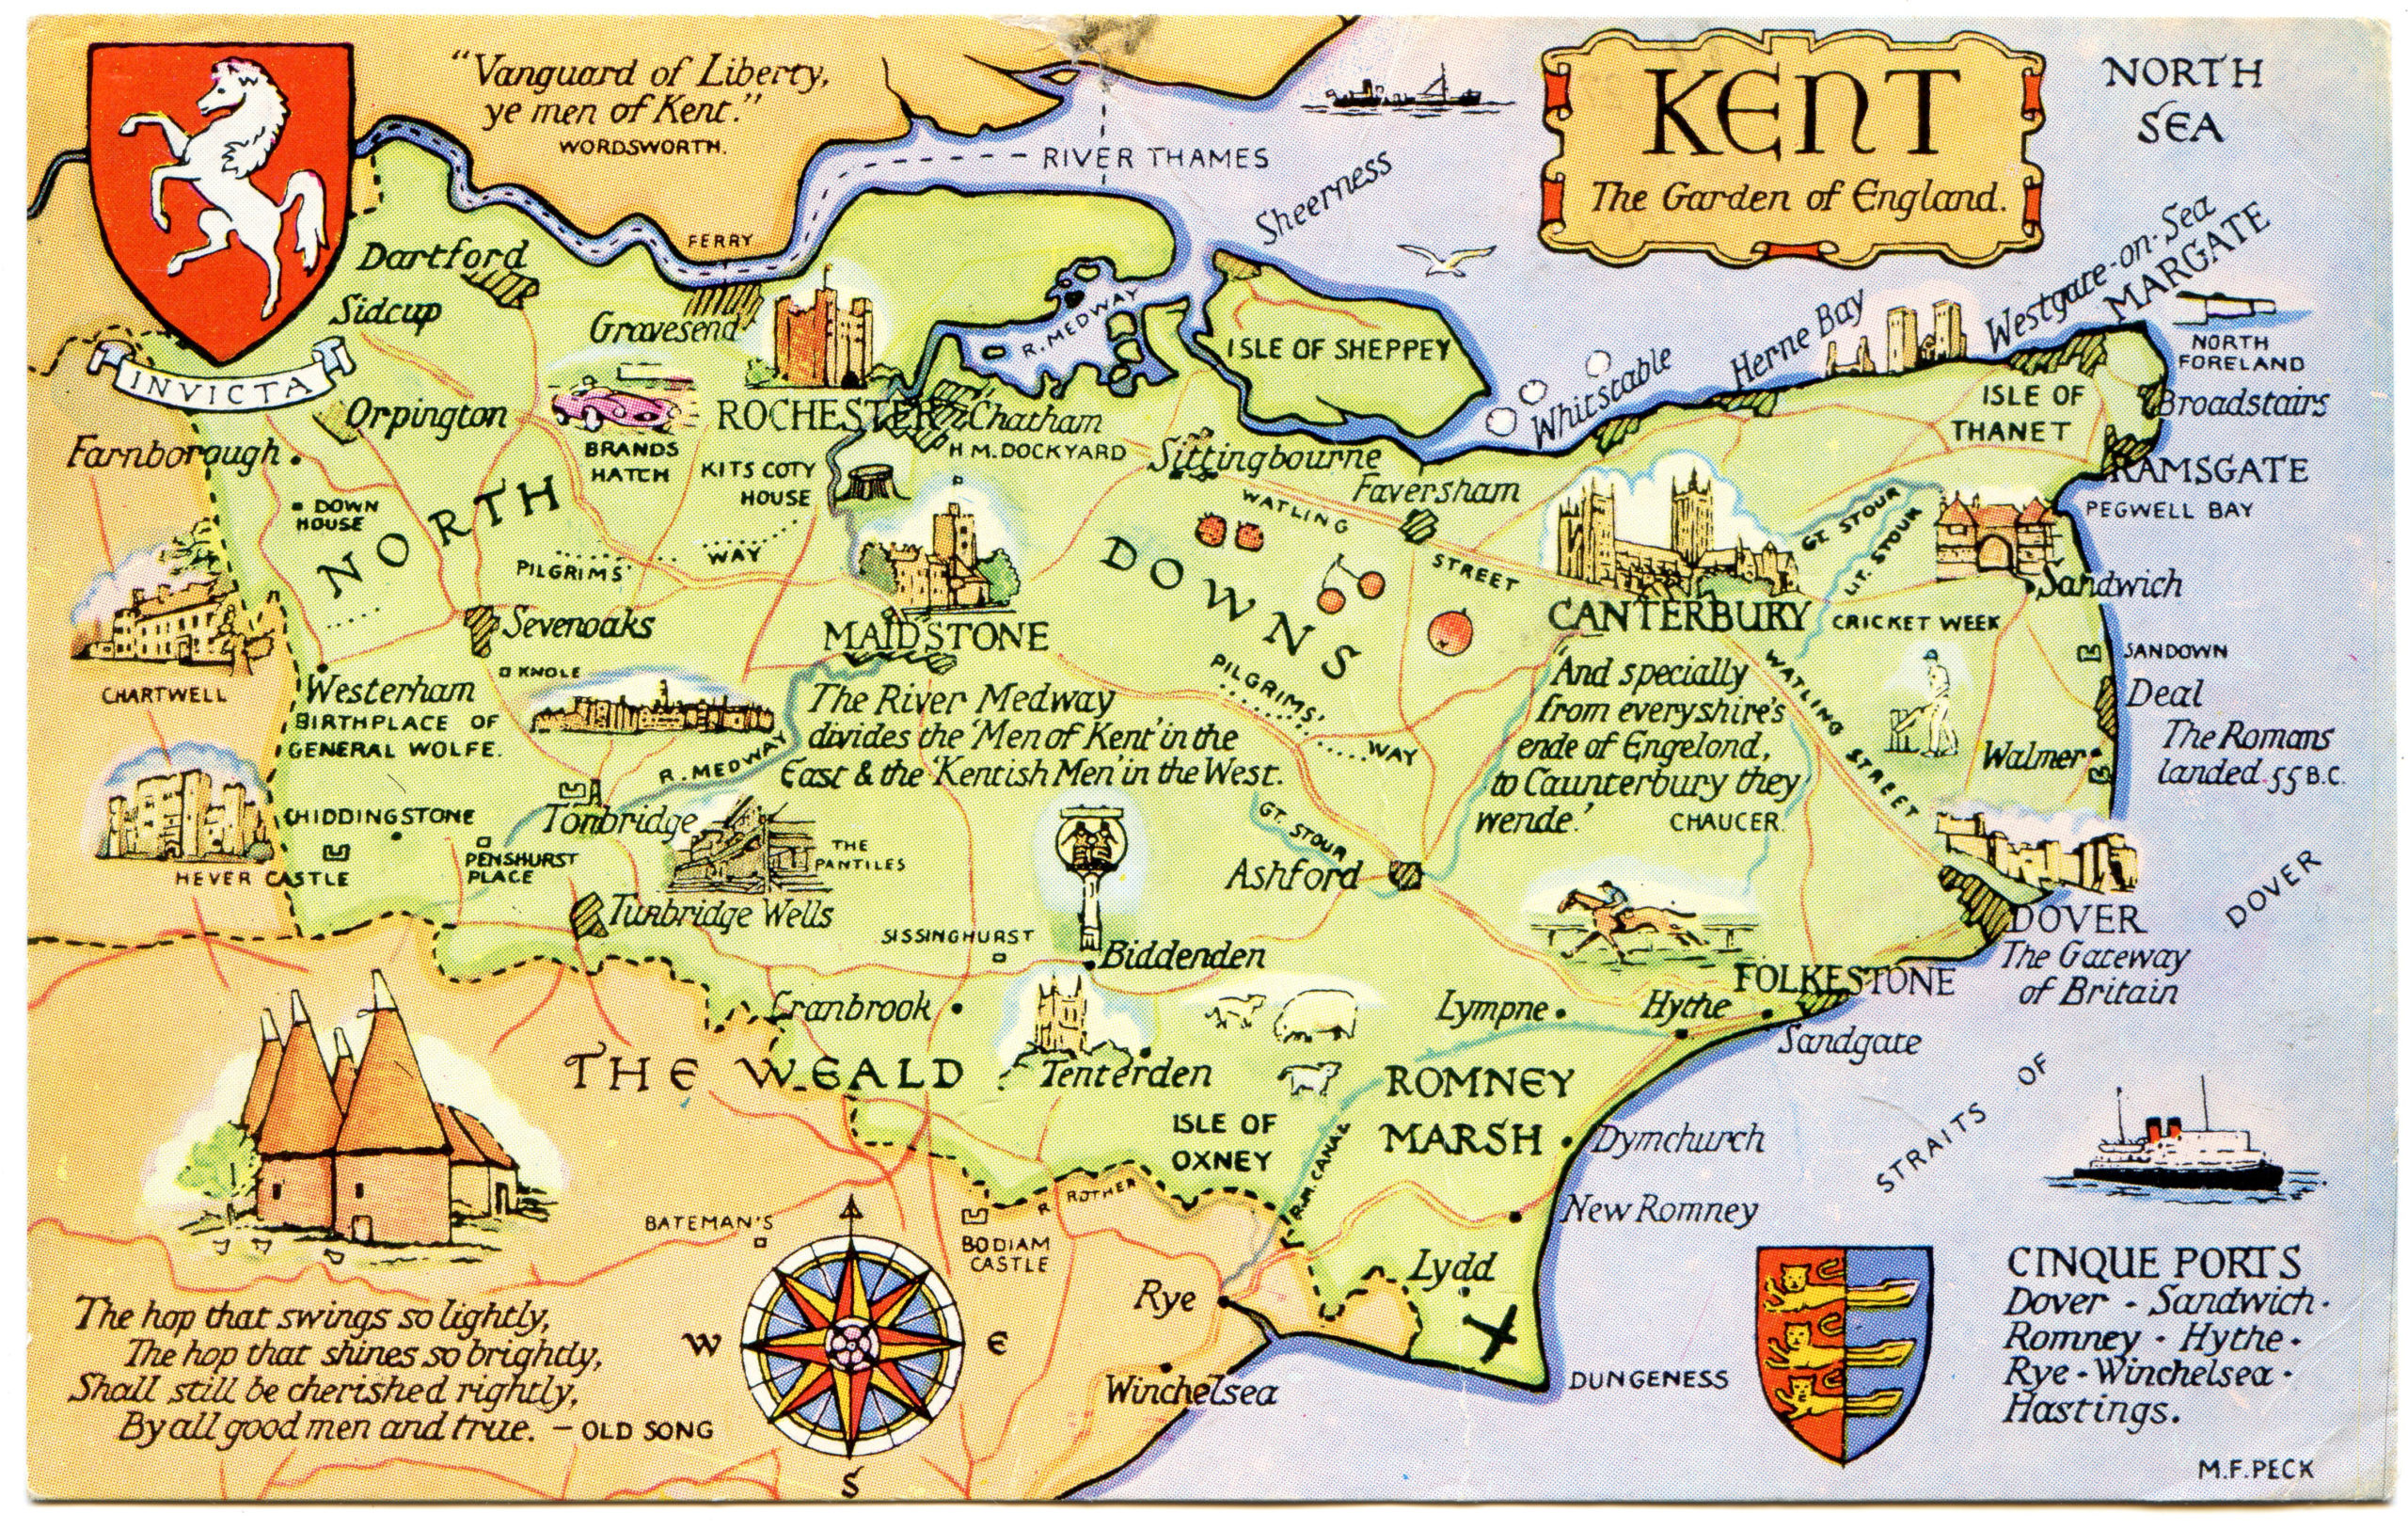 Postcard Map Of Kent The Garden Of England Flickr 